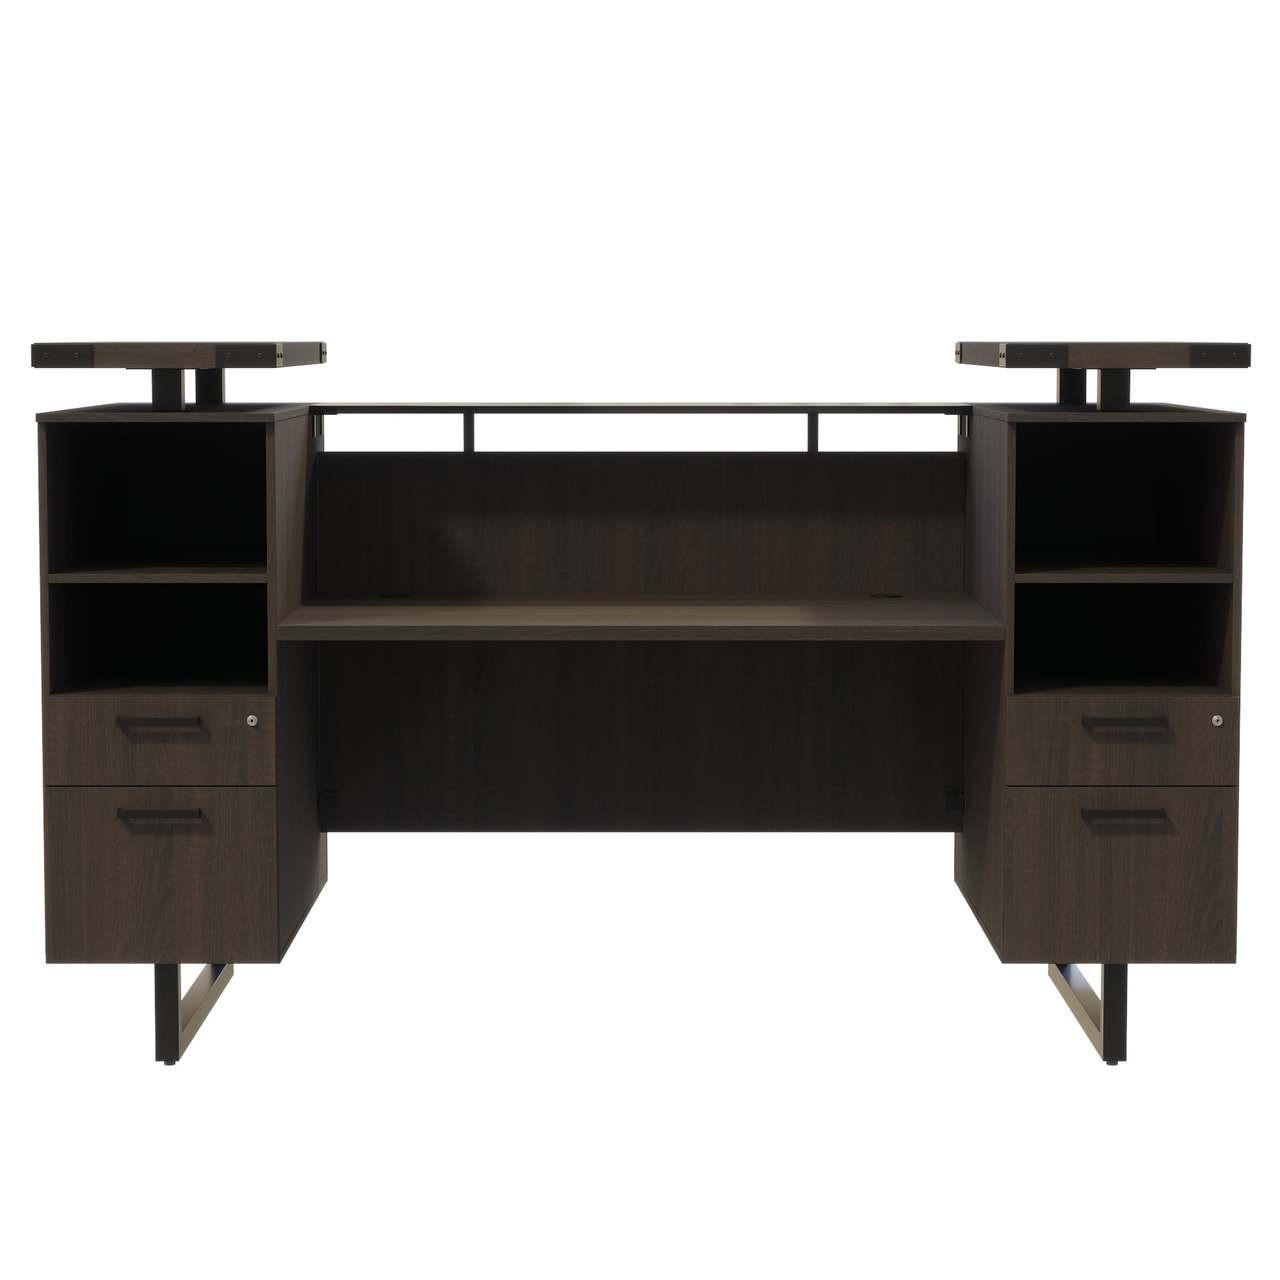 Safco Products Safco Mirella 78" Floating Glass Top Reception Desk MRRD78 (4 Finish Options!) 